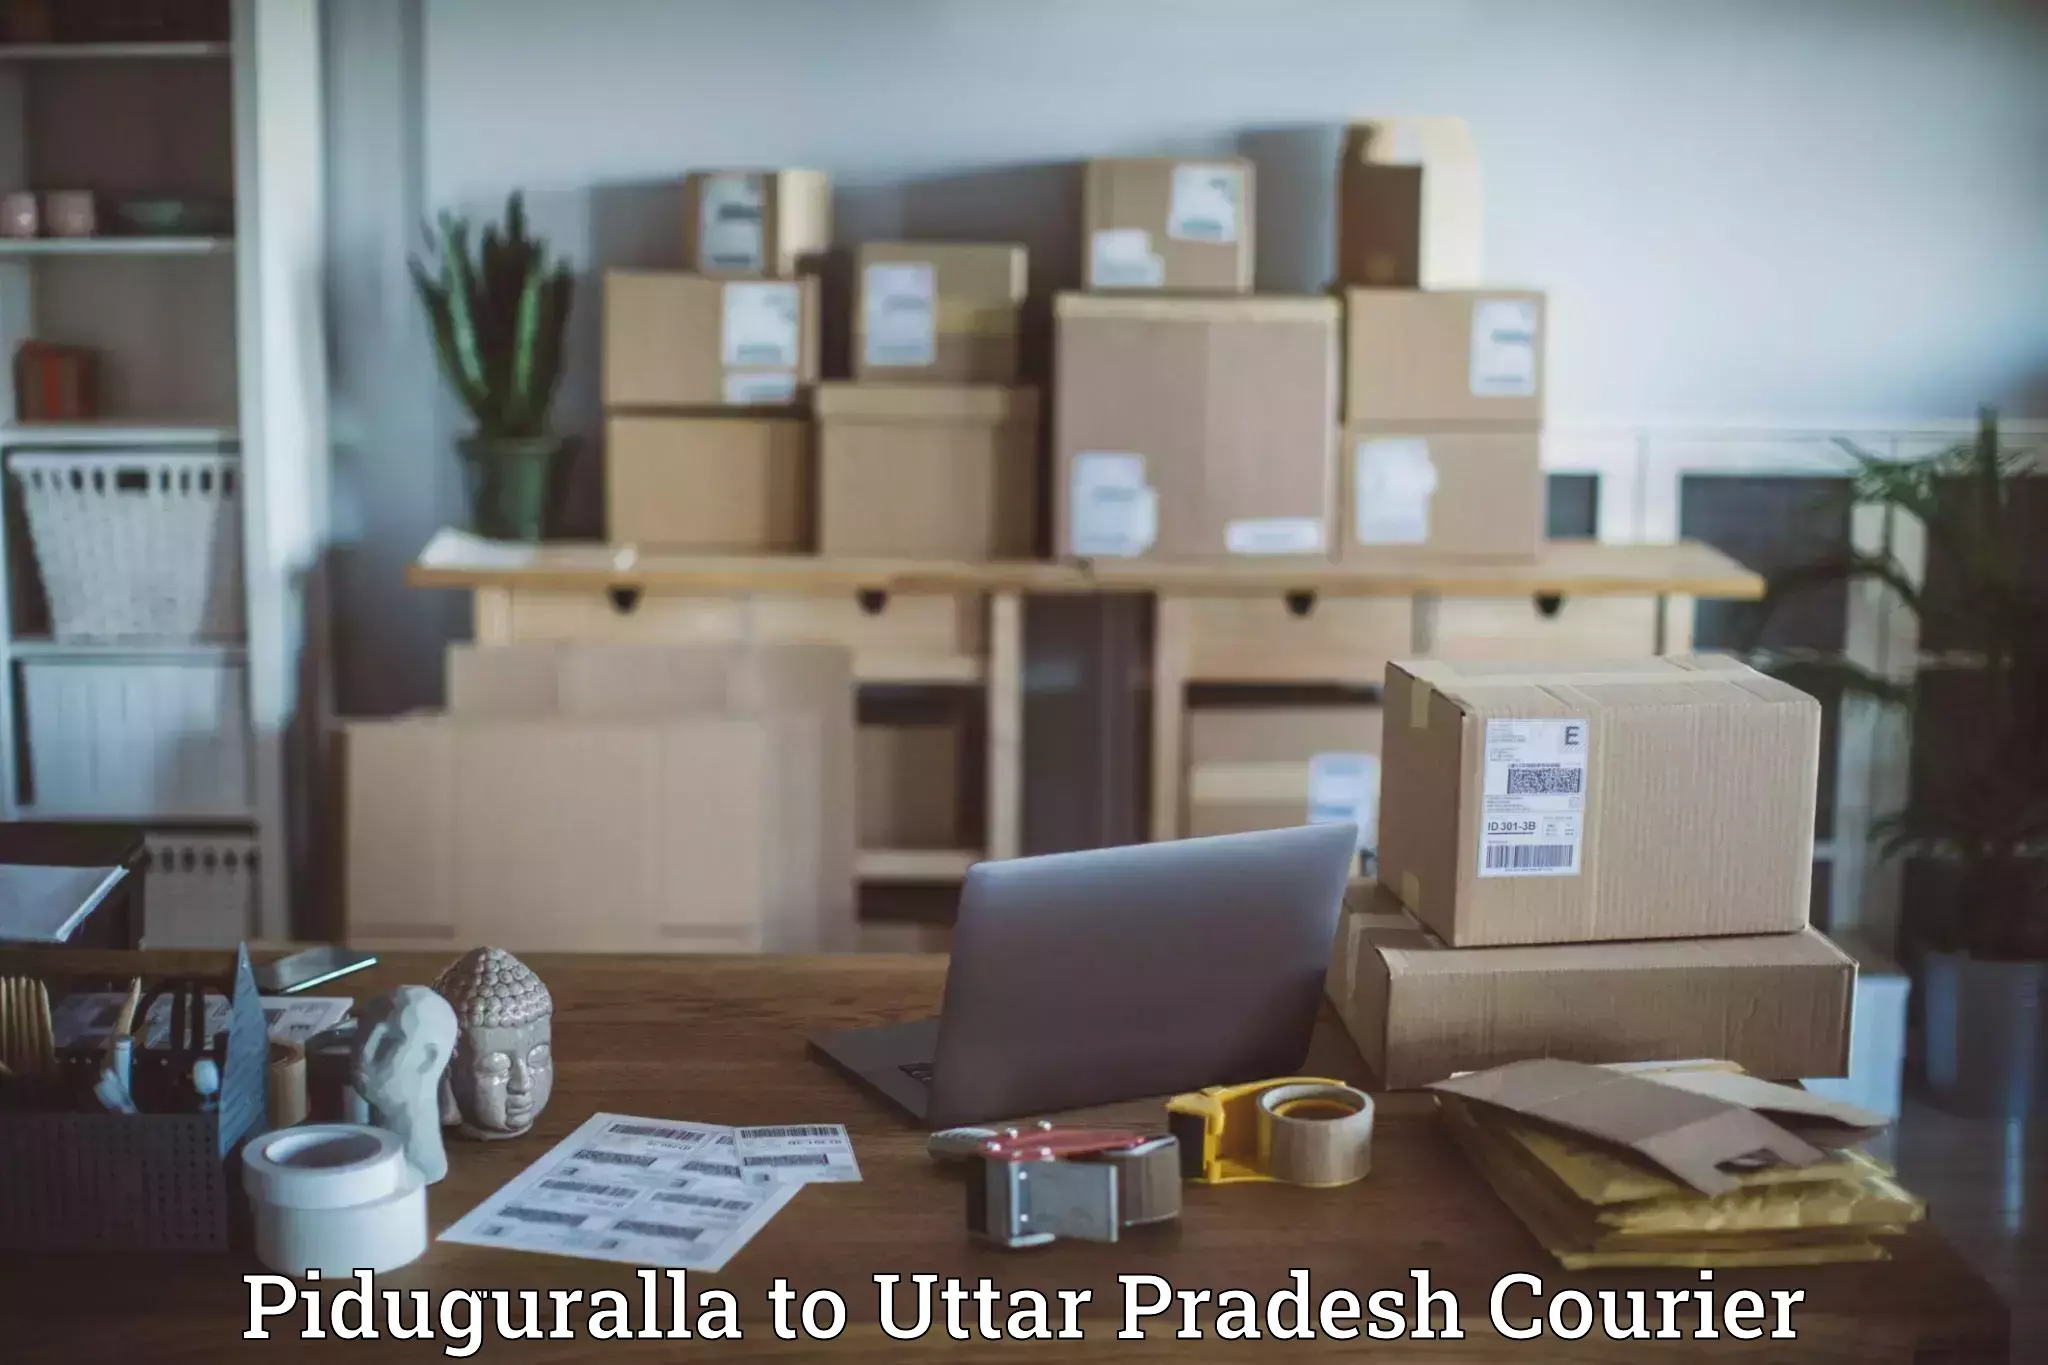 Same-day delivery solutions Piduguralla to Allahabad